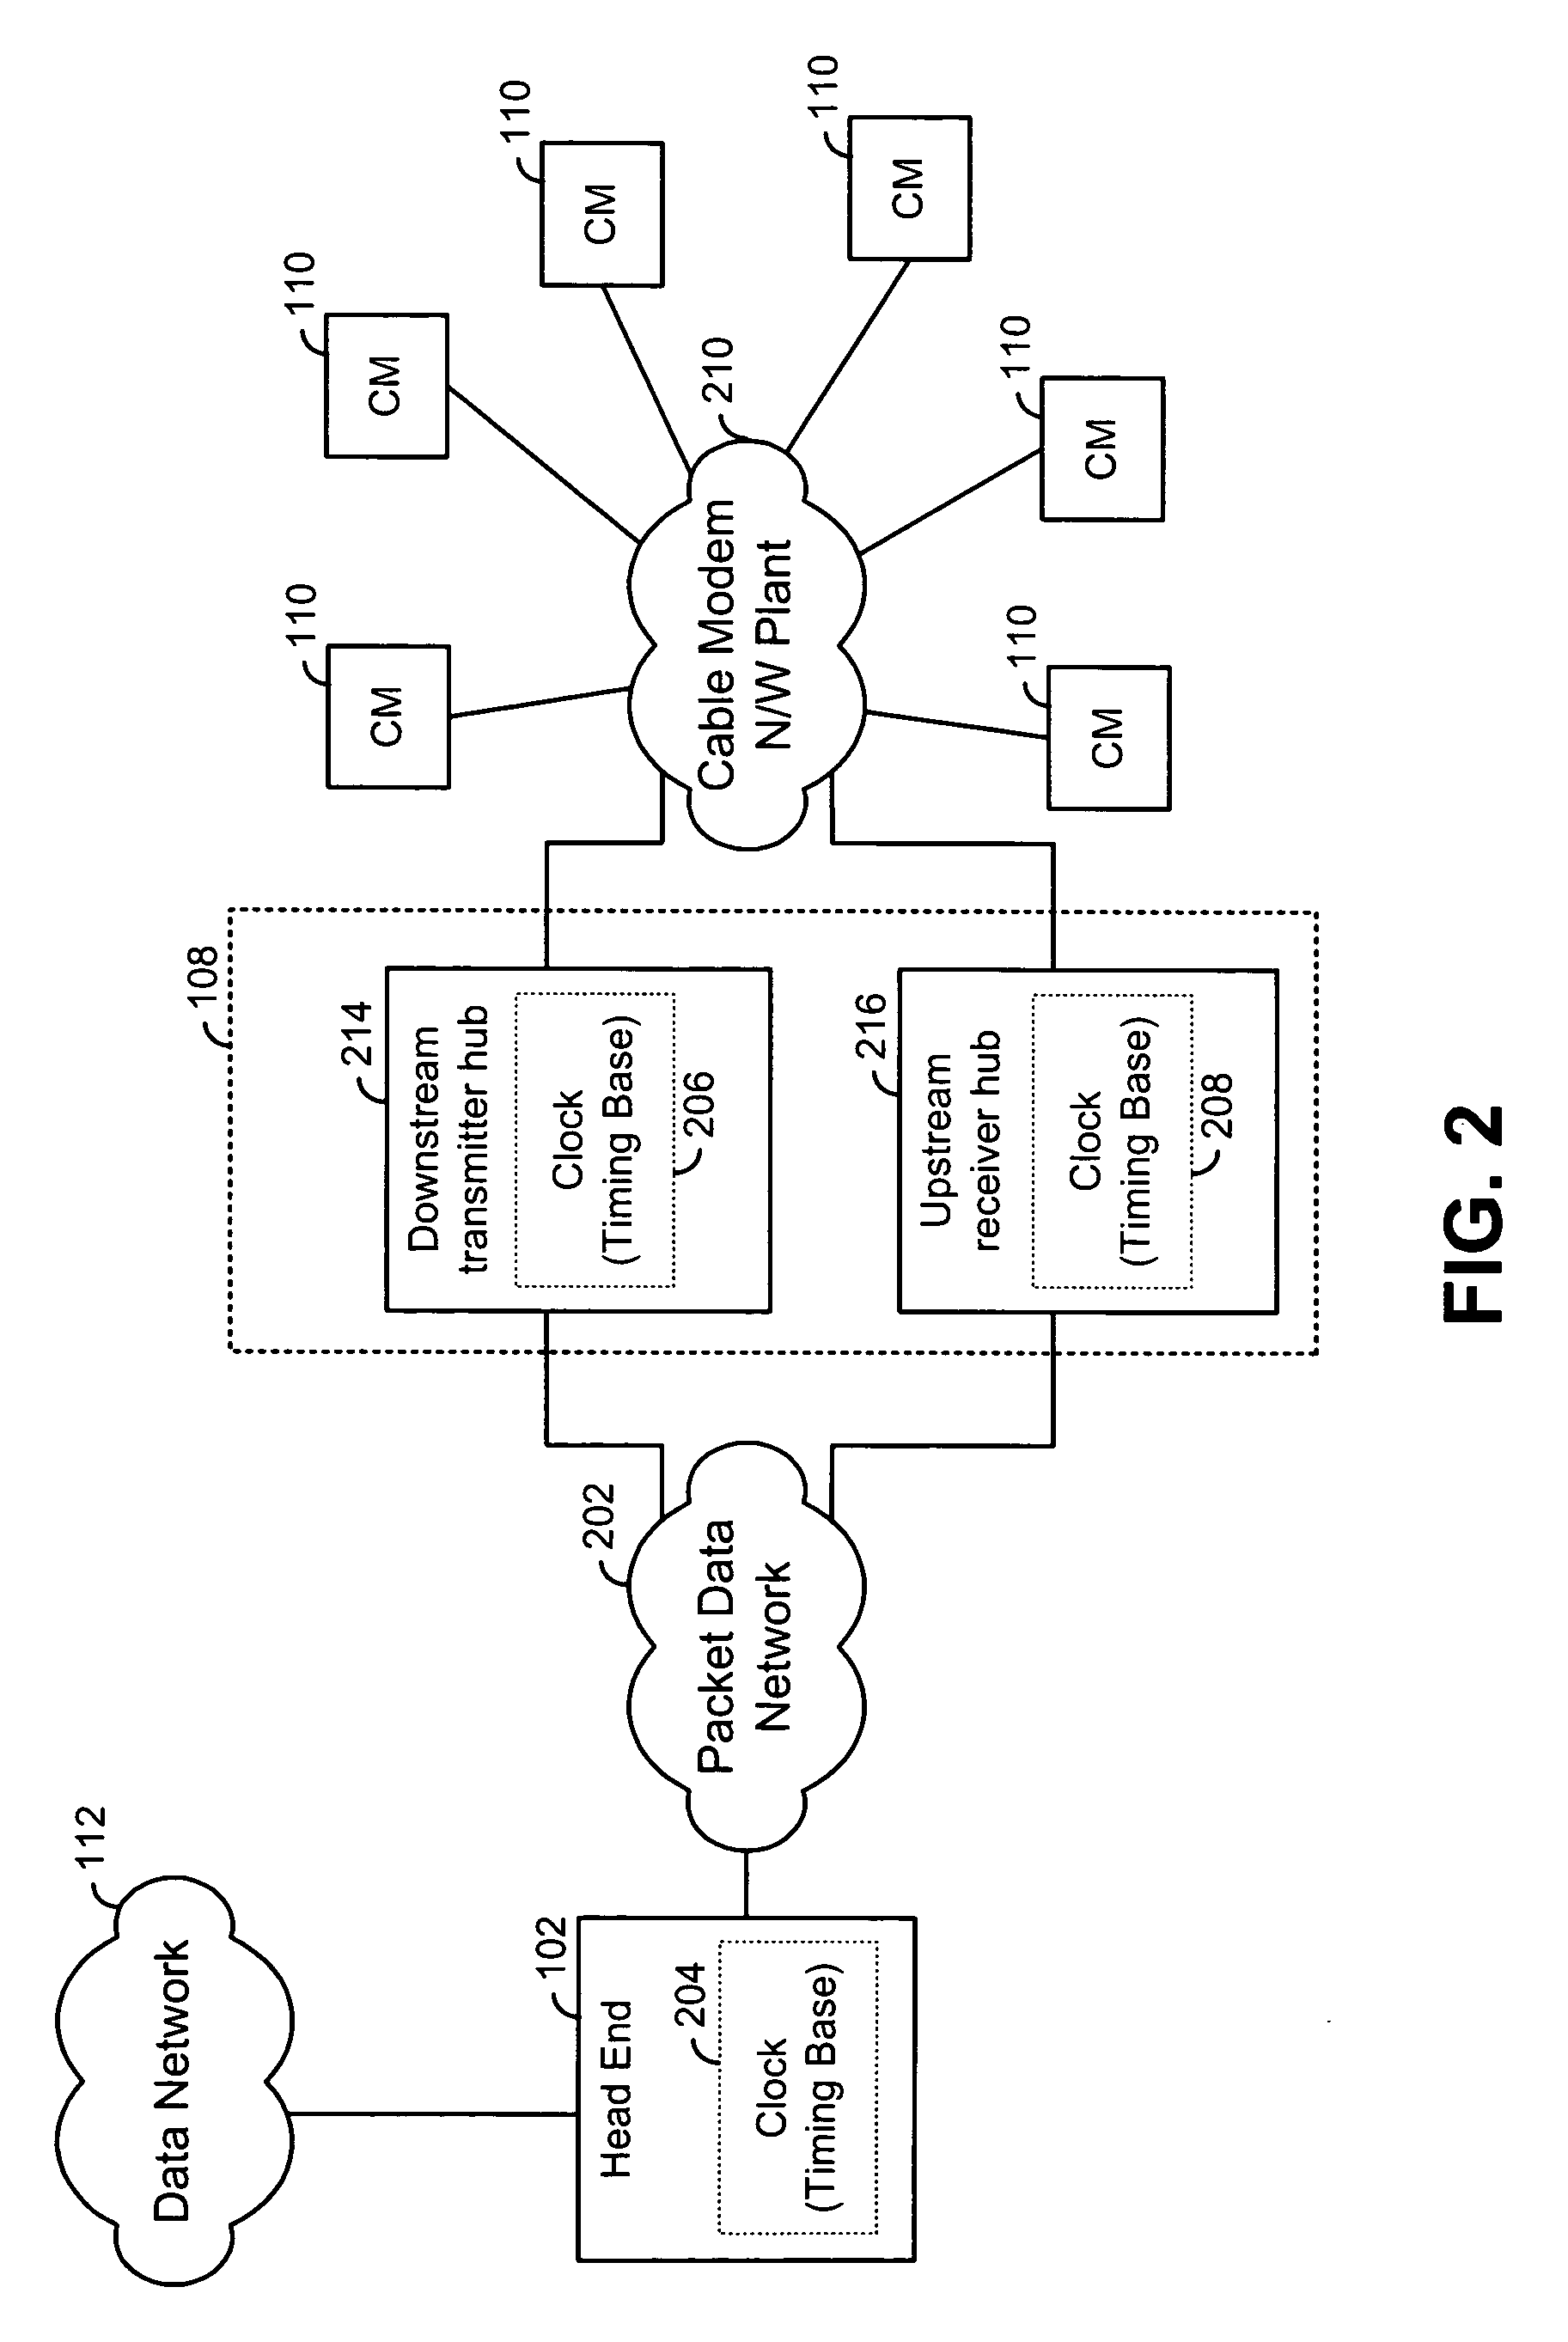 Synchronization of distributed cable modem network components